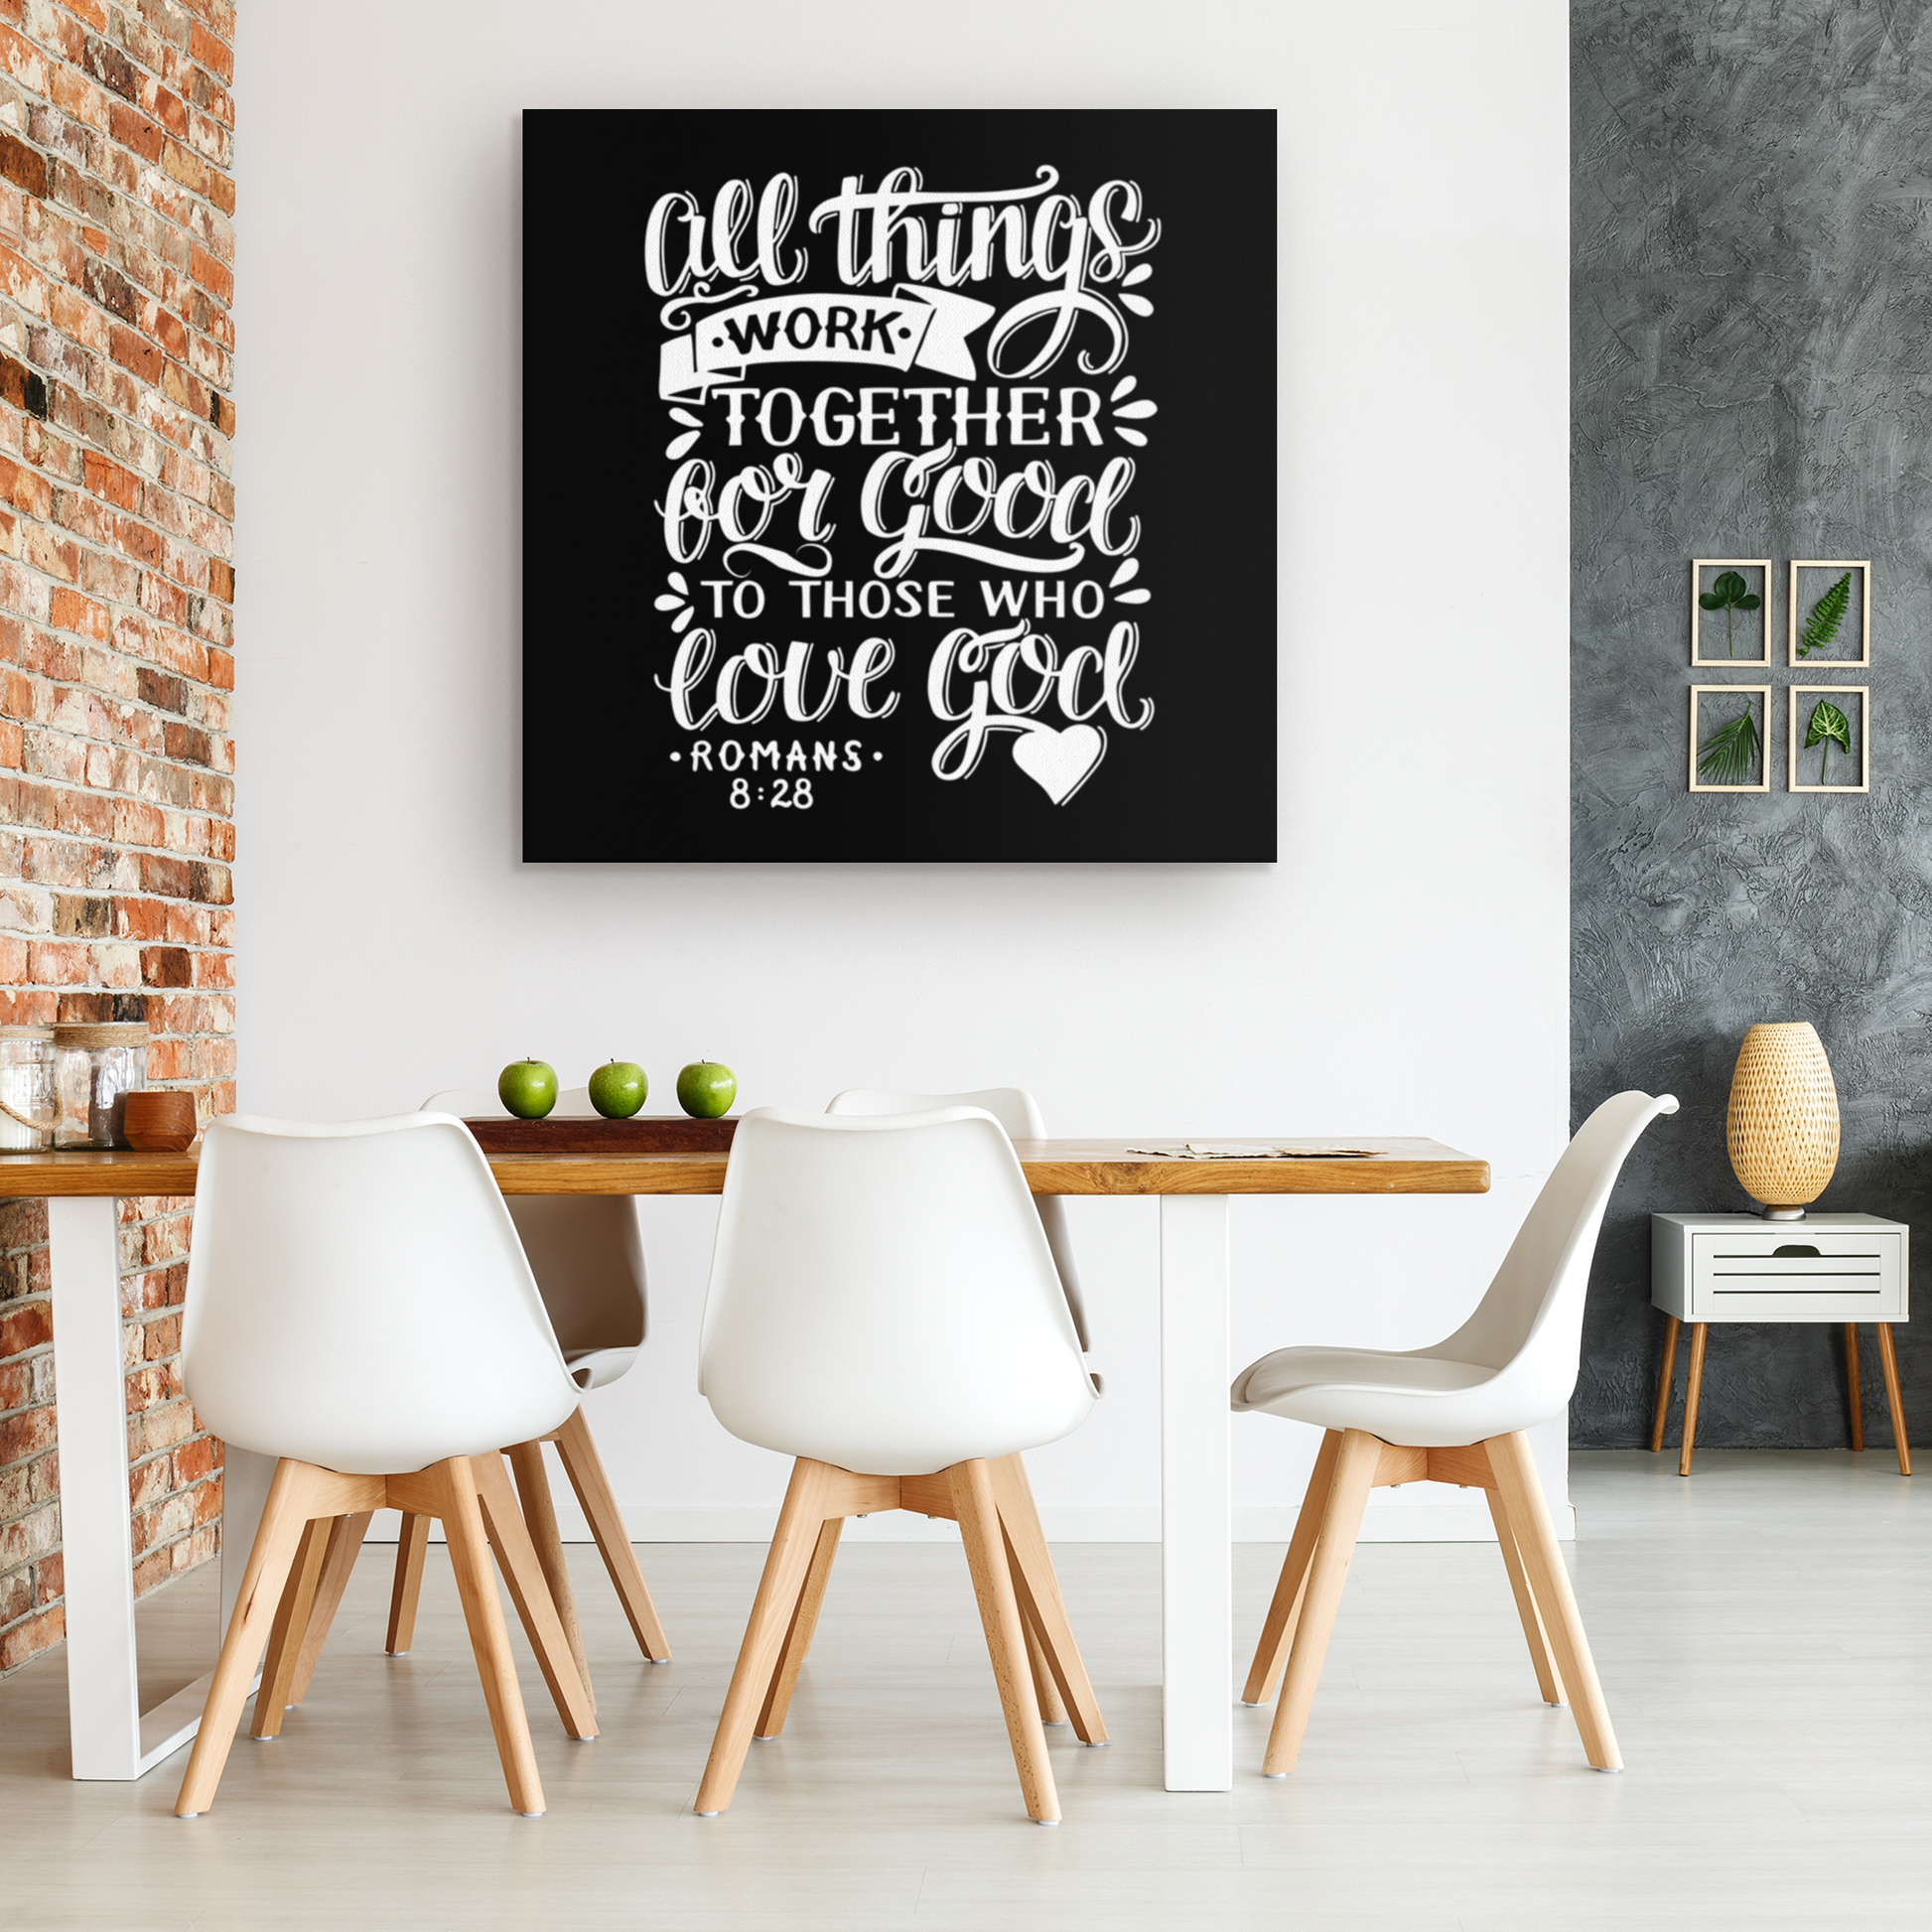 All Things Work Together For Good To Those Who Love God, Romans 8:28 - Square Gallery Canvas Wrap on living room wall